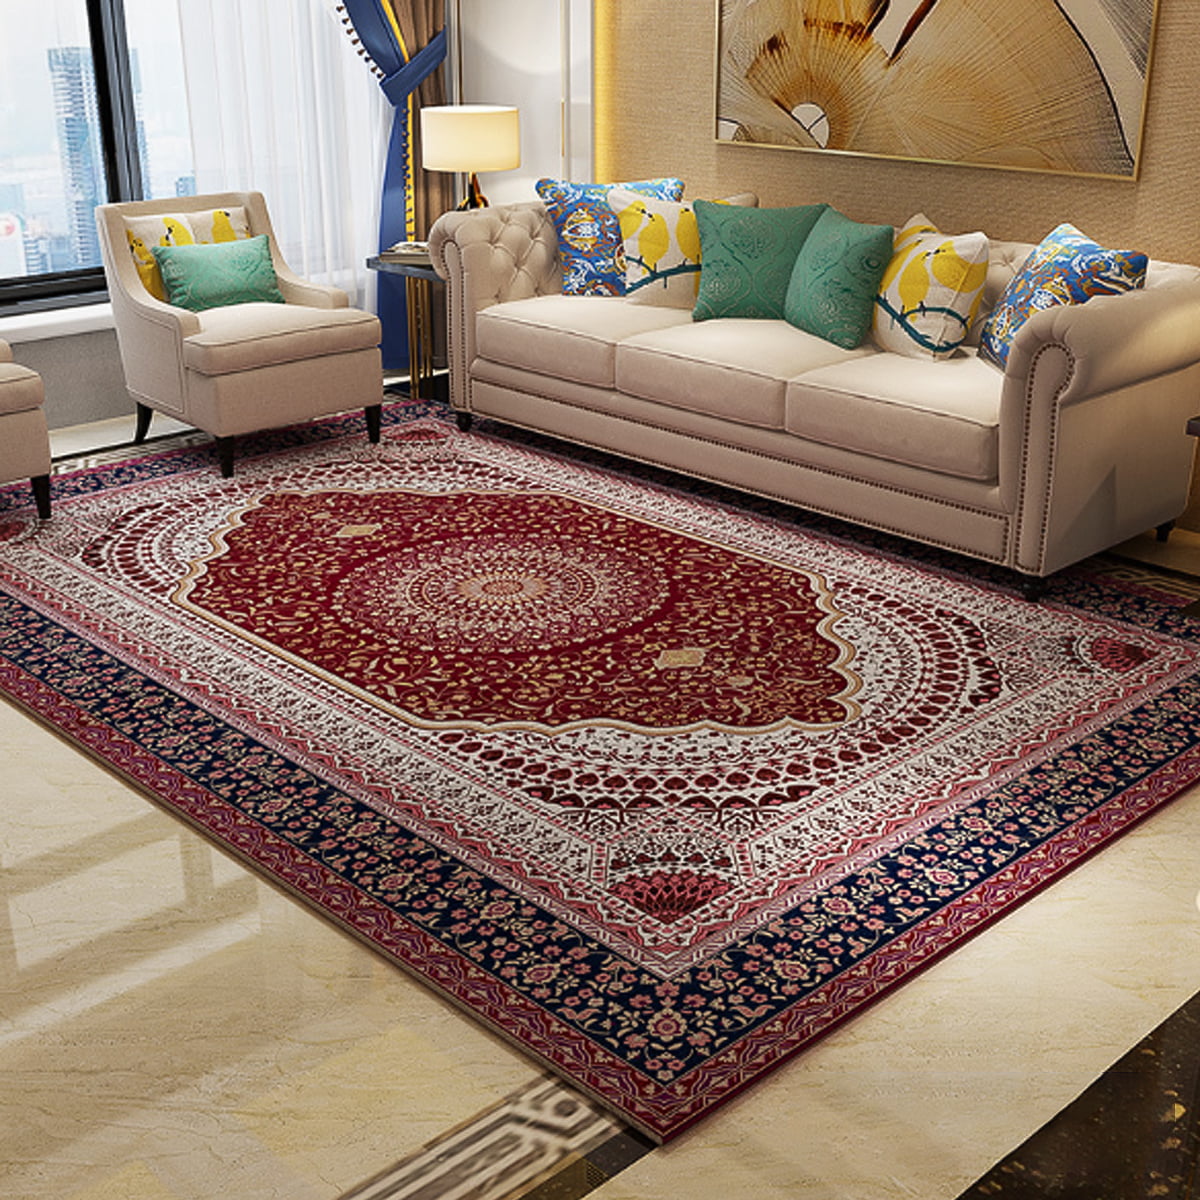 Abani Rugs Red Carpet Large For Living, Tribal Print Area Rugs